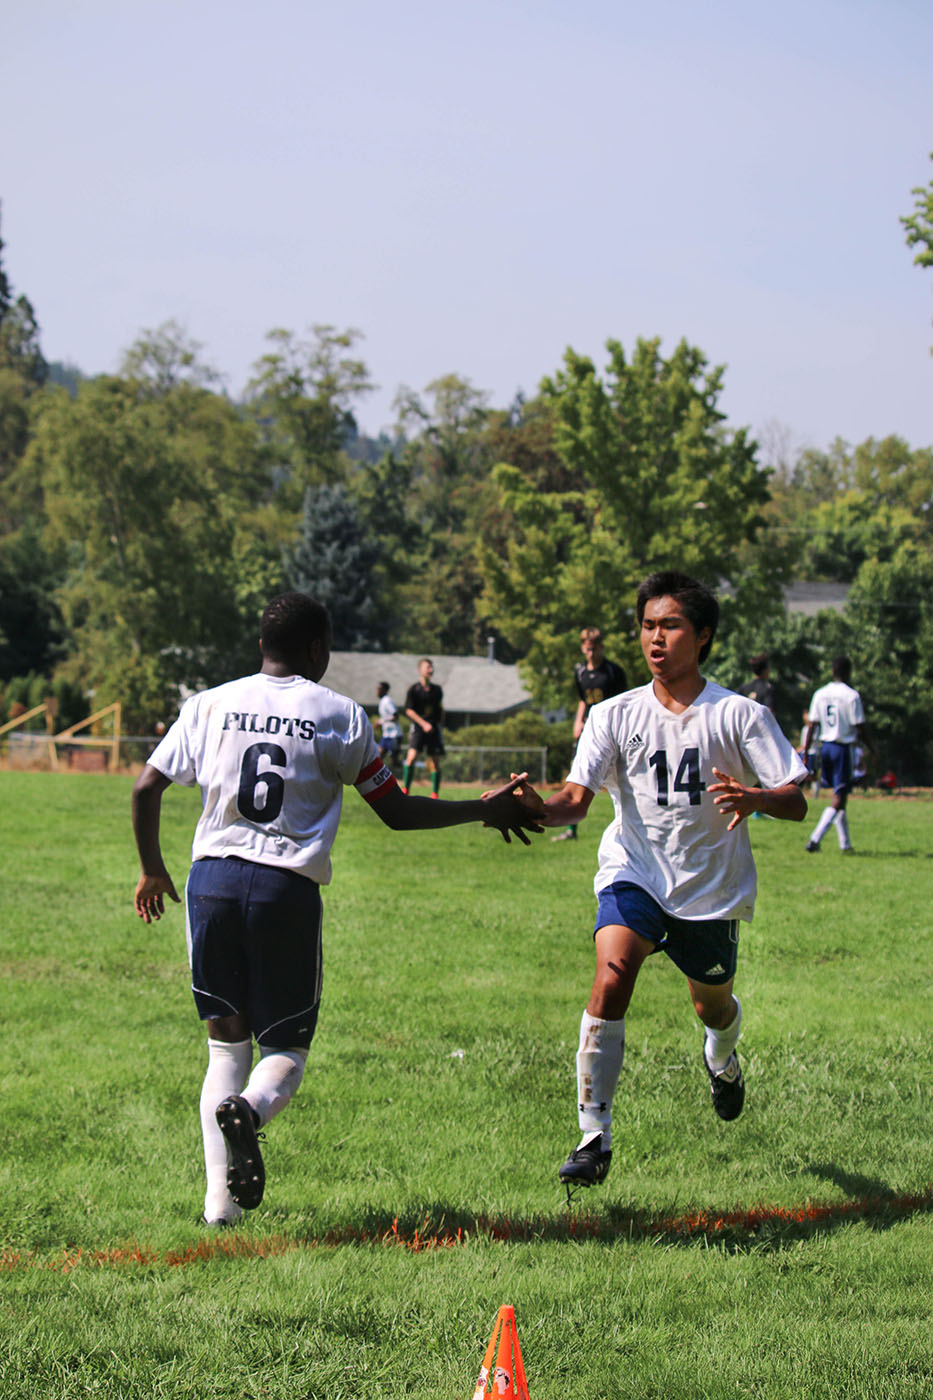 Top Christian Academy's Boys Soccer team, encourage each other during game,